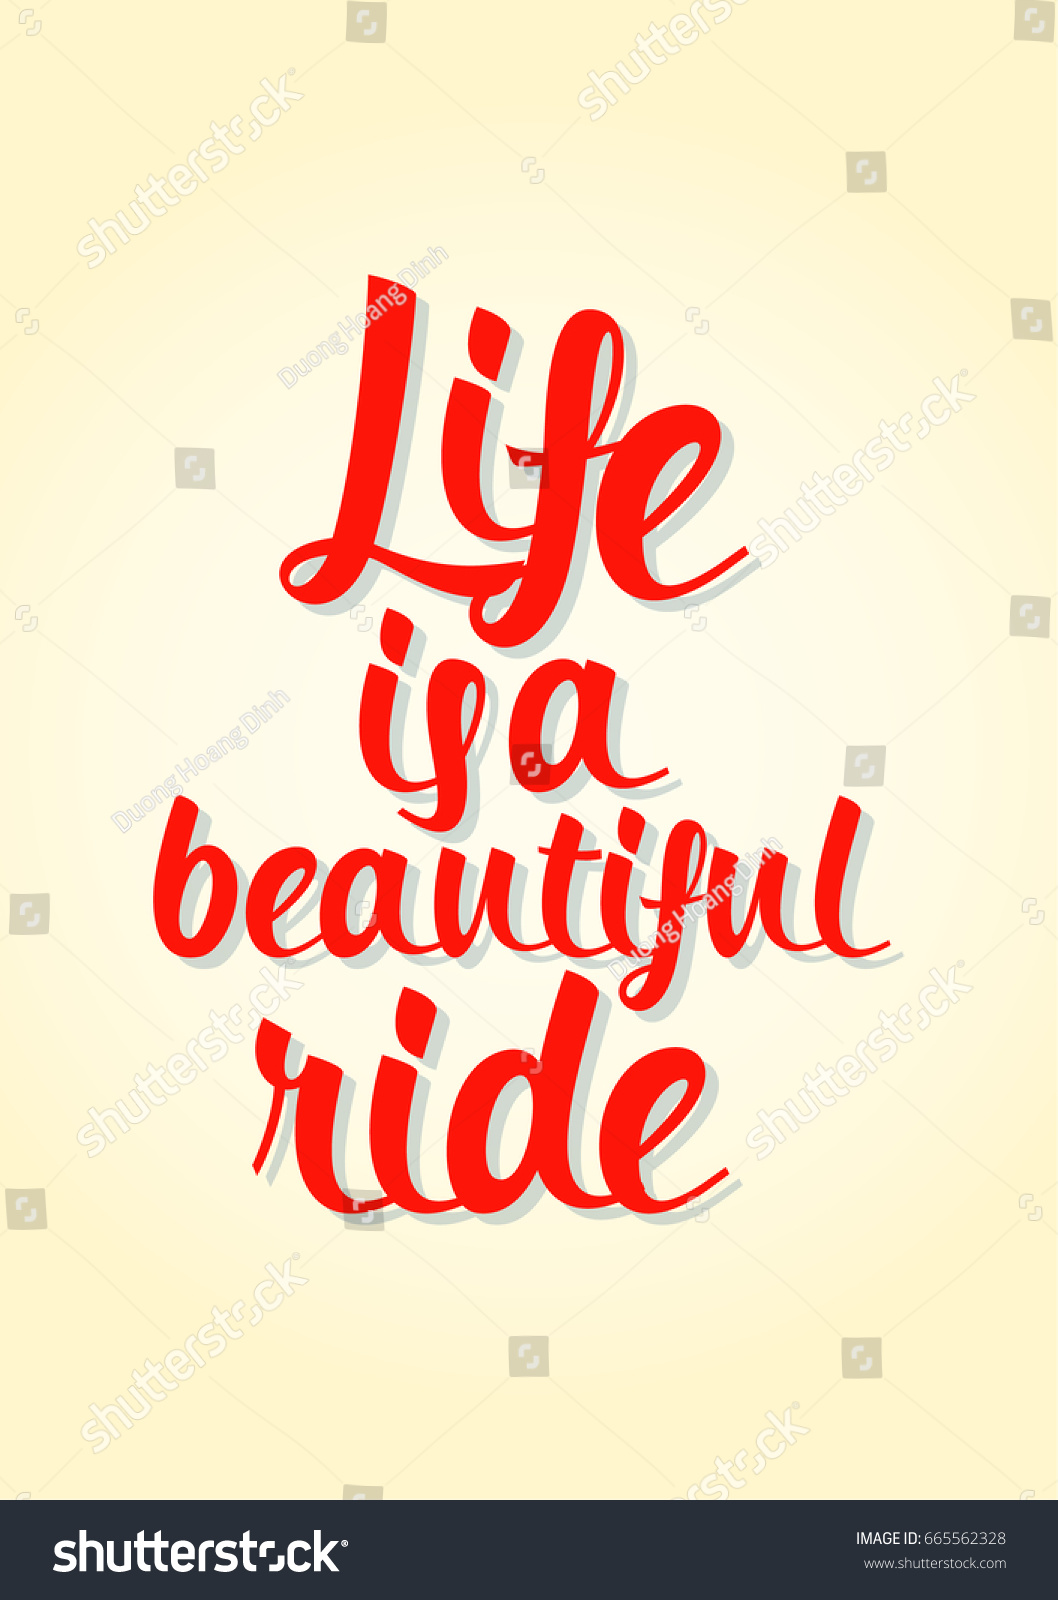 Lettering quotes motivation about life quote Calligraphy Inspirational quote Life is beautiful ride